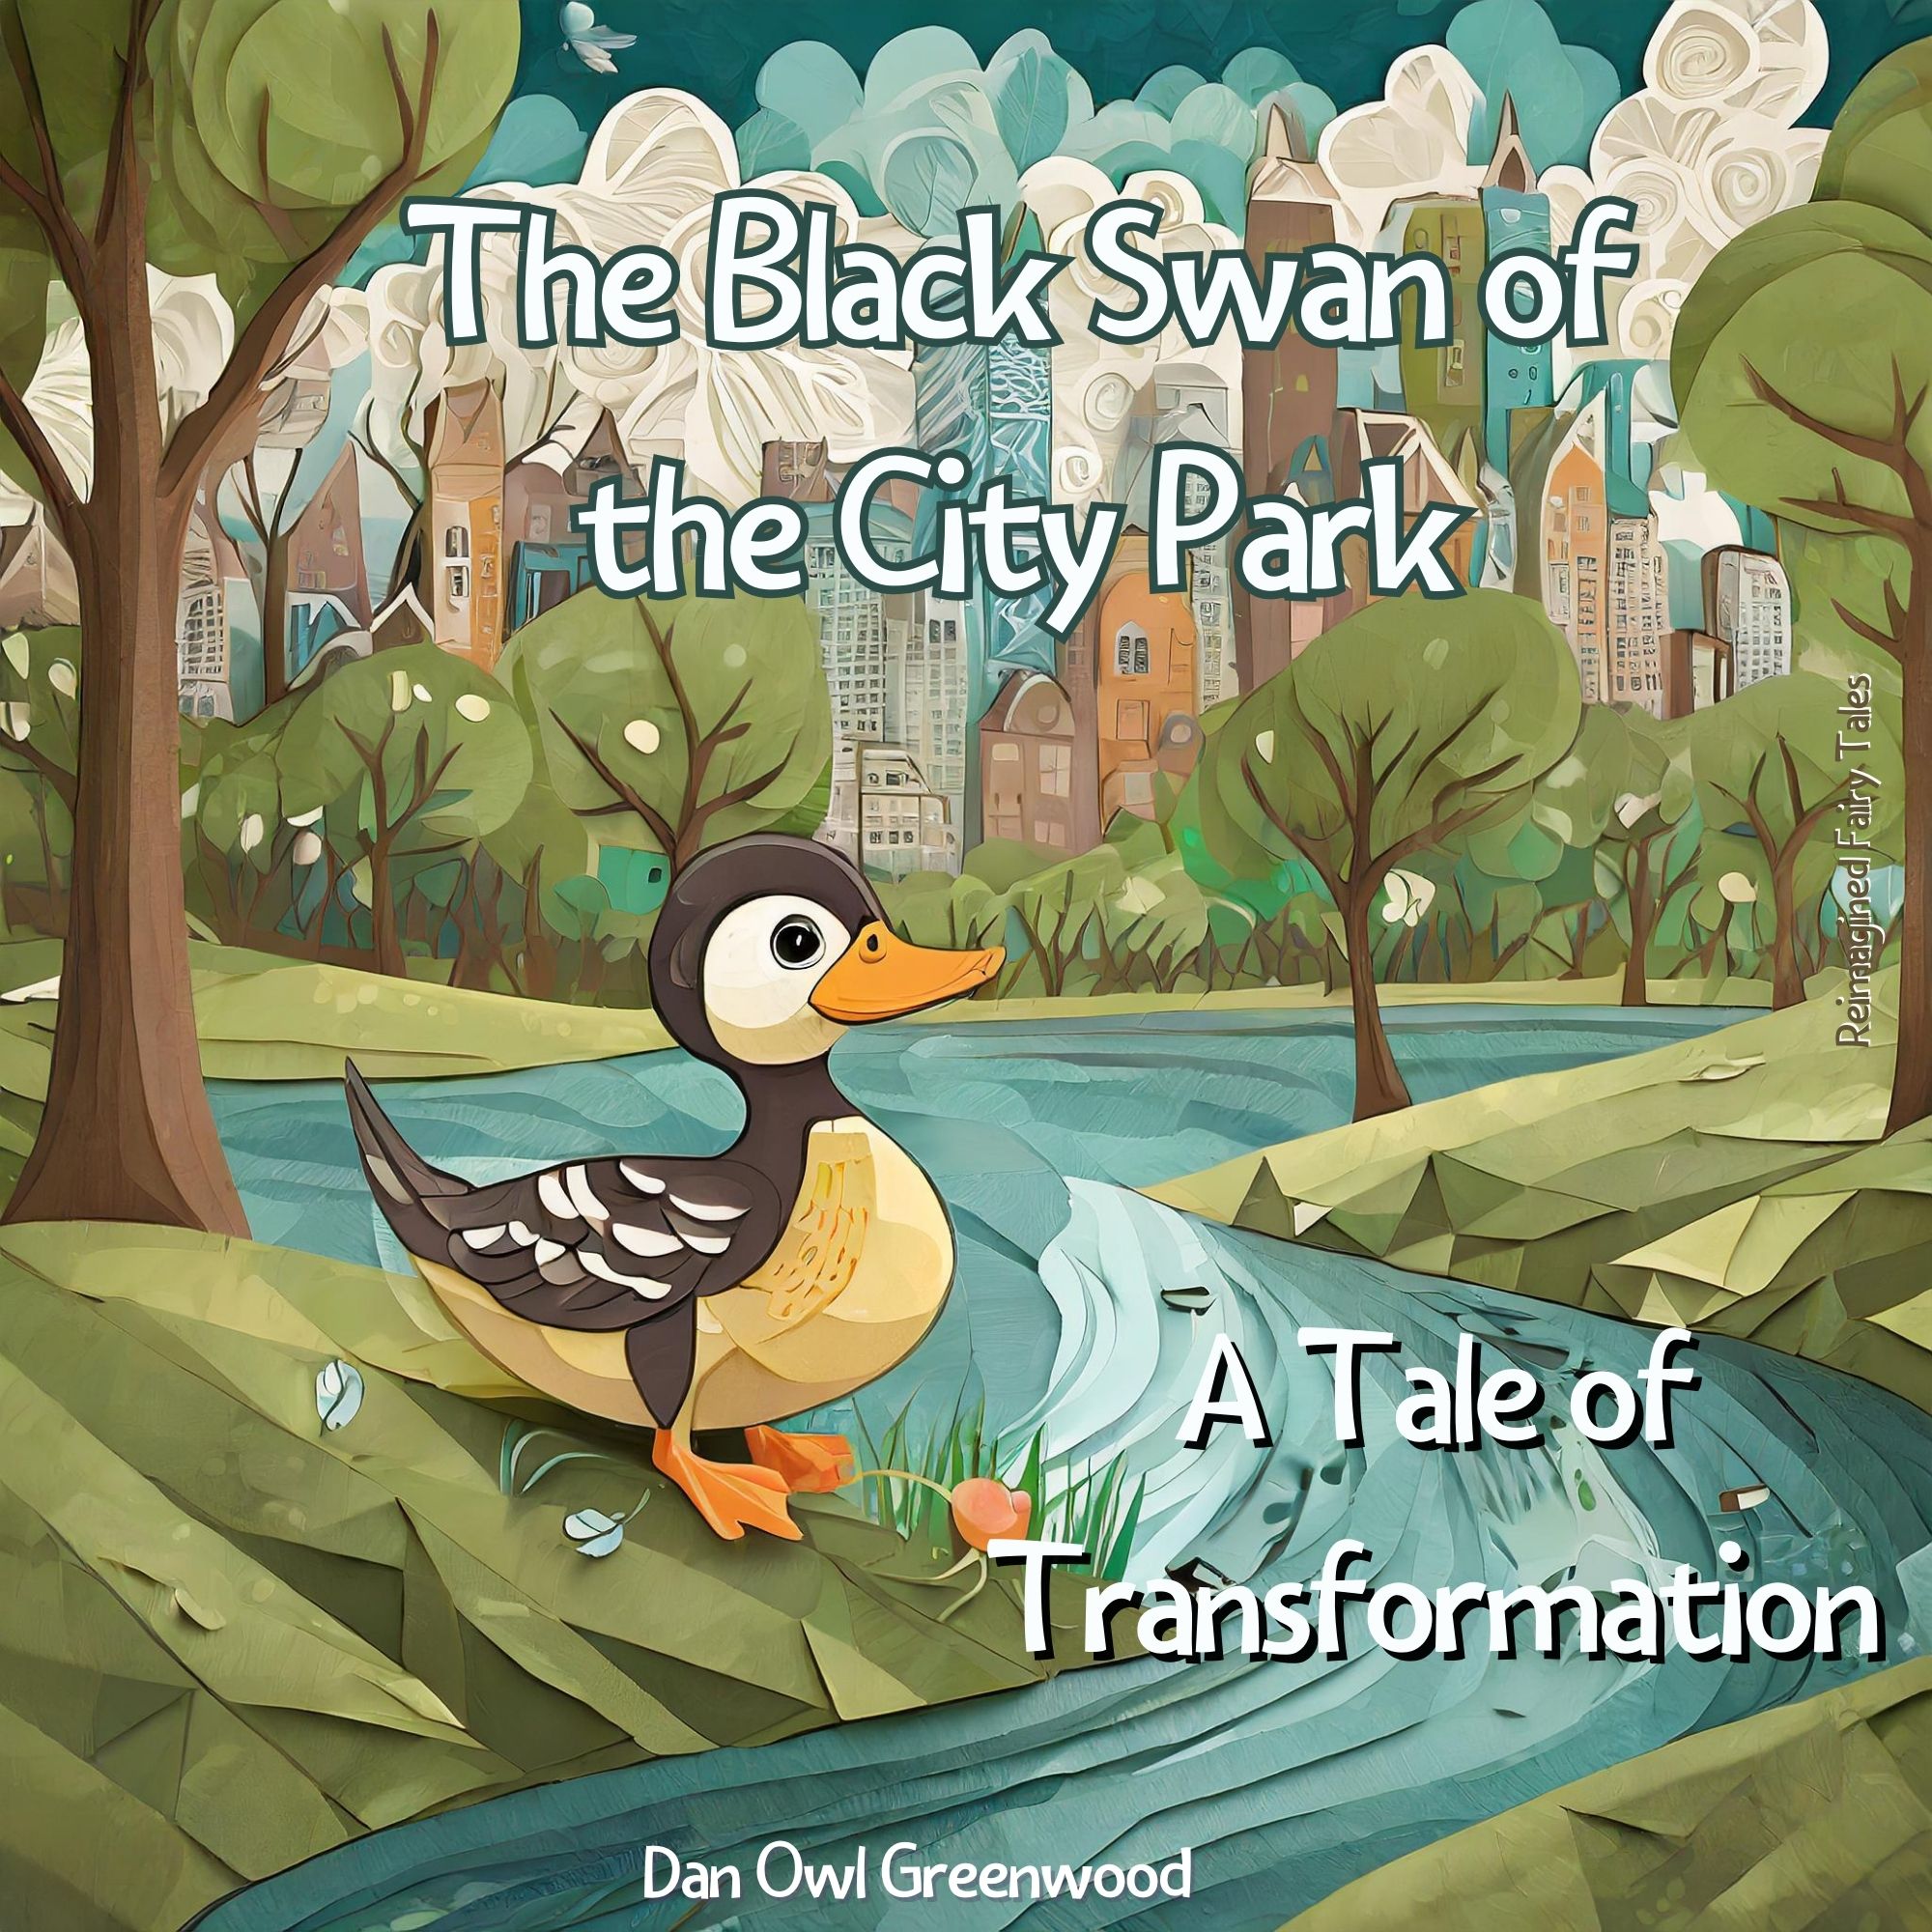 The Black Swan of the City Park: A Tale of Transformation